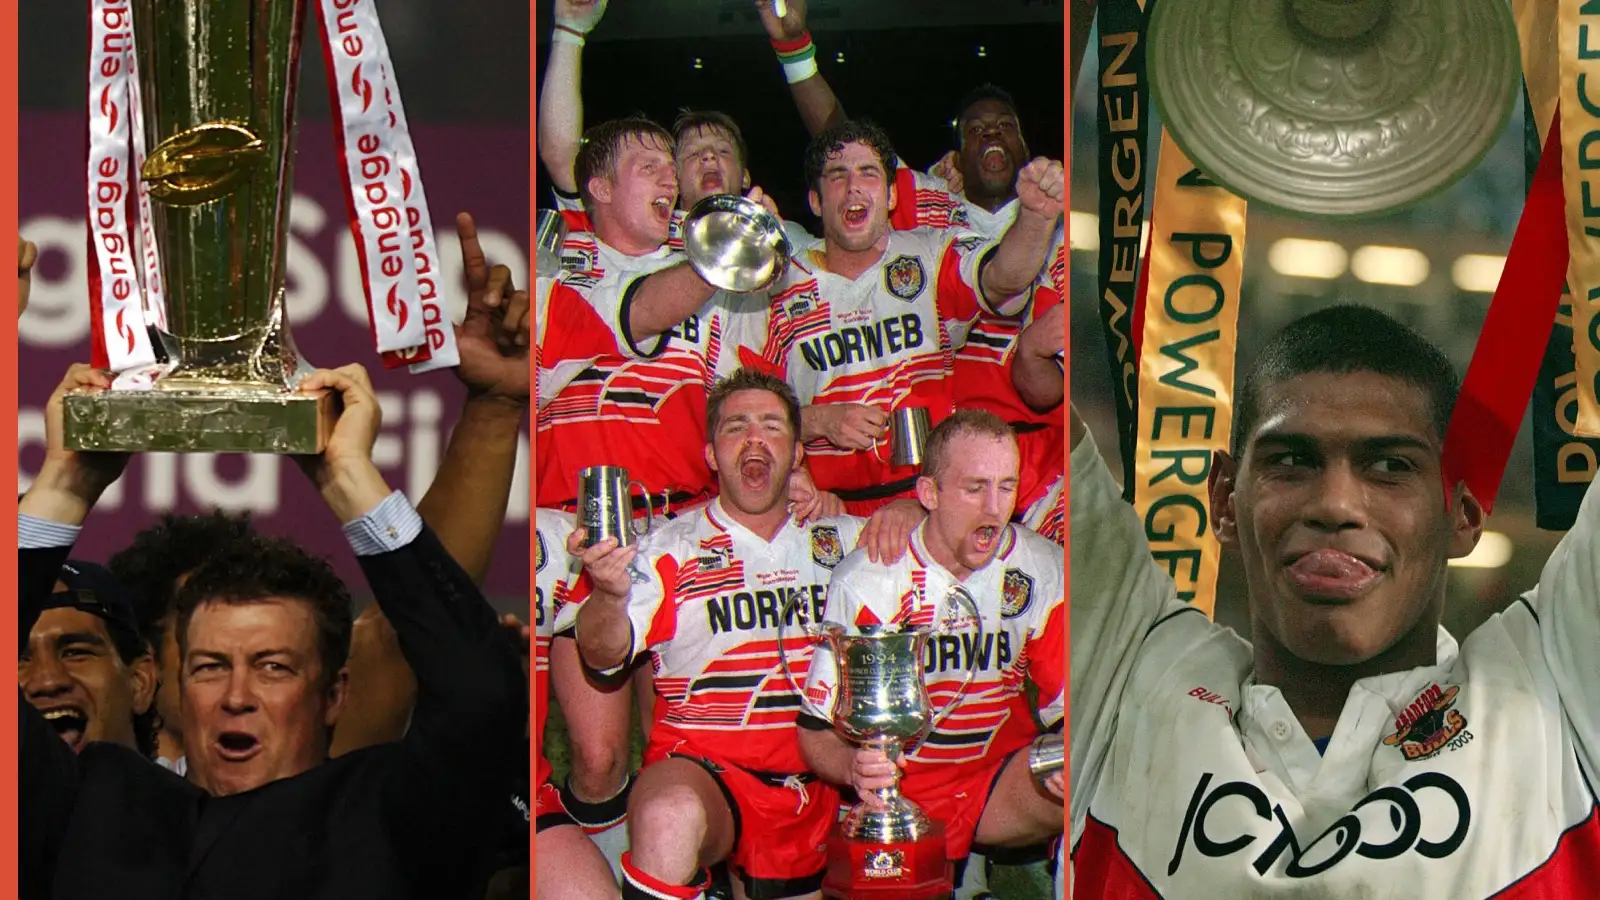 The historic club Wigan Warriors joined with their Challenge Cup Final victory